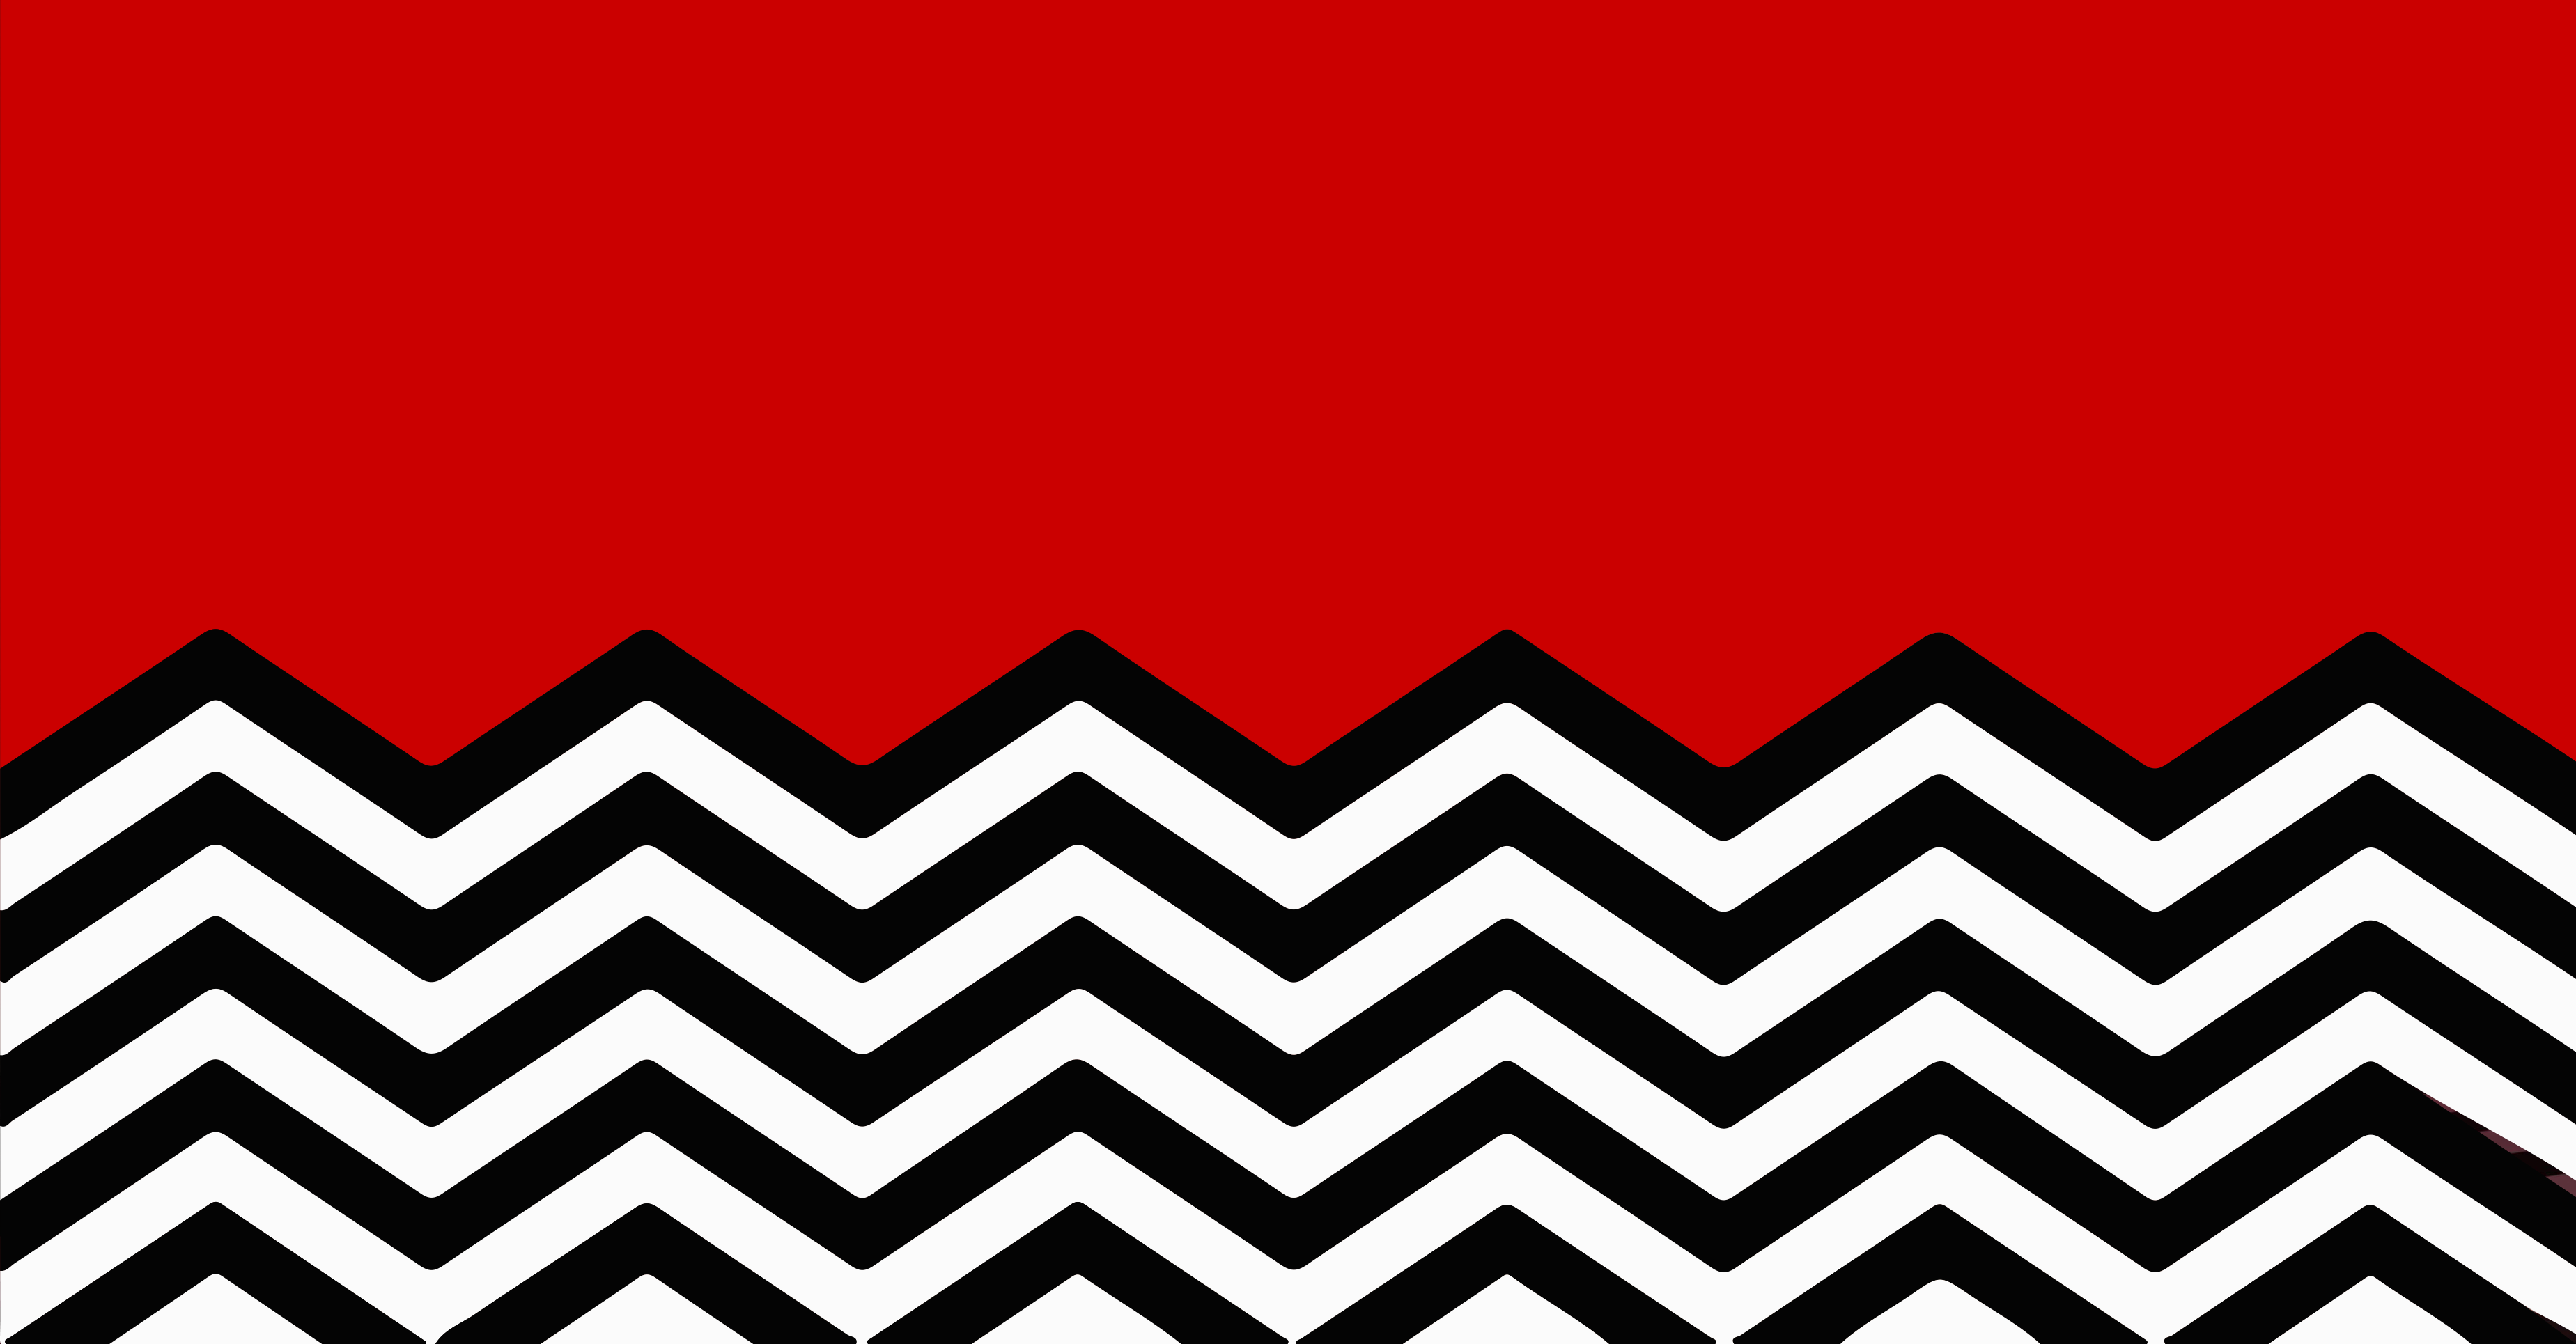 My New Lynchian Twin Peaks Red Room Cover Image For My